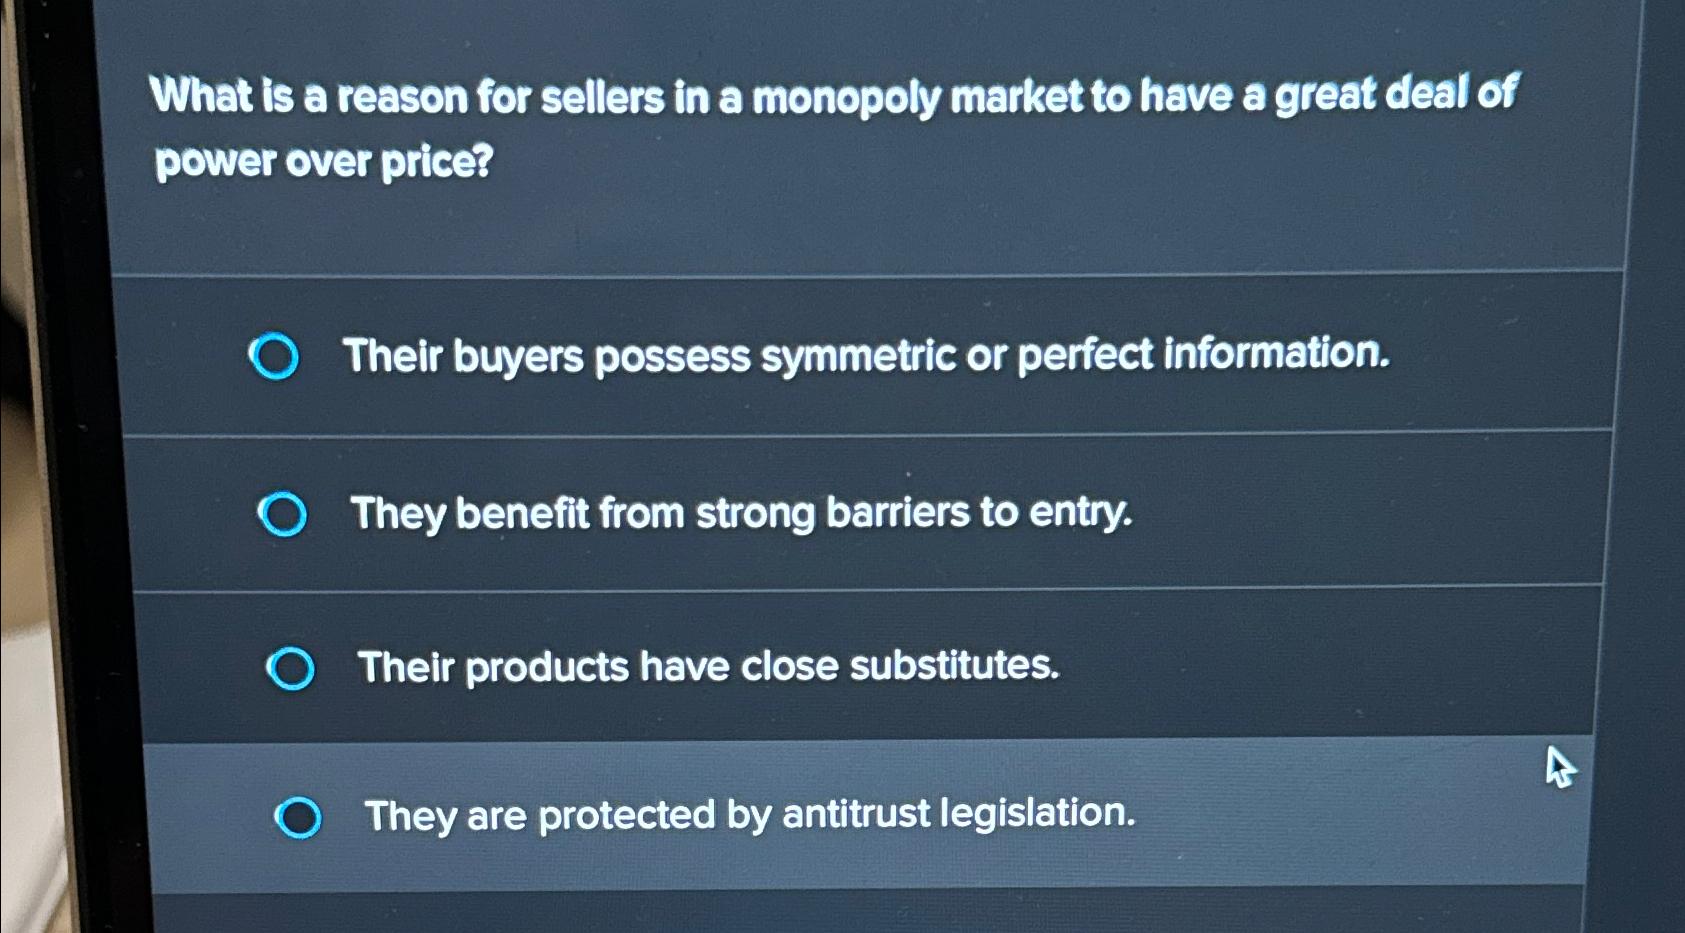 What is a reason for sellers in a monopoly market to have a great deal of power over price? Their buyers